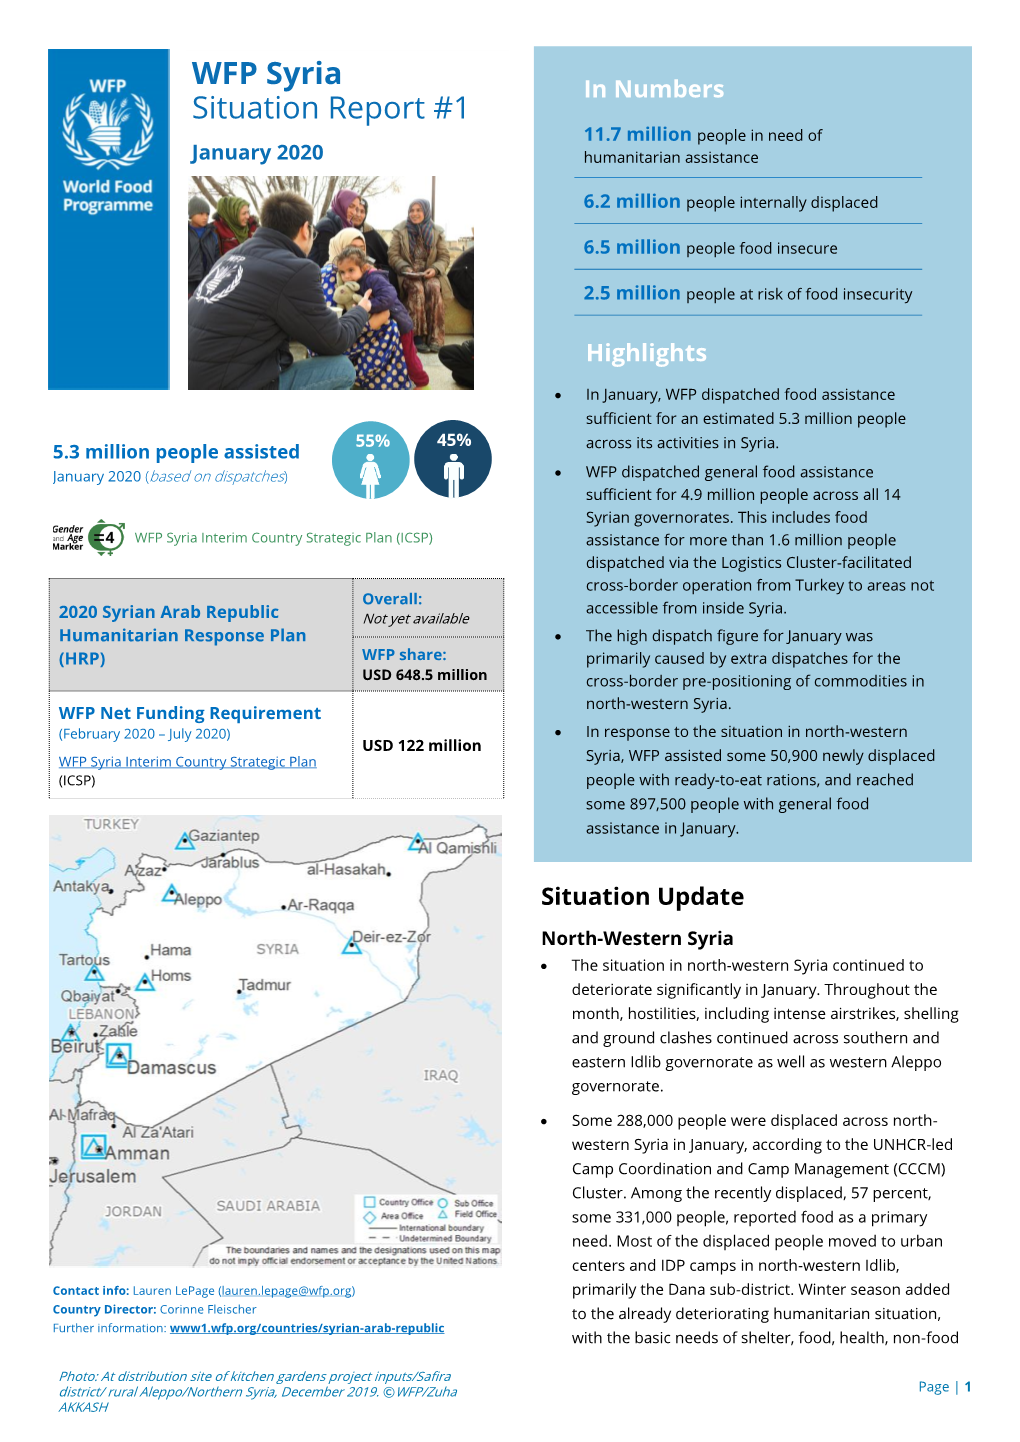 WFP Syria Situation Report #1 Page | 2 January 2020